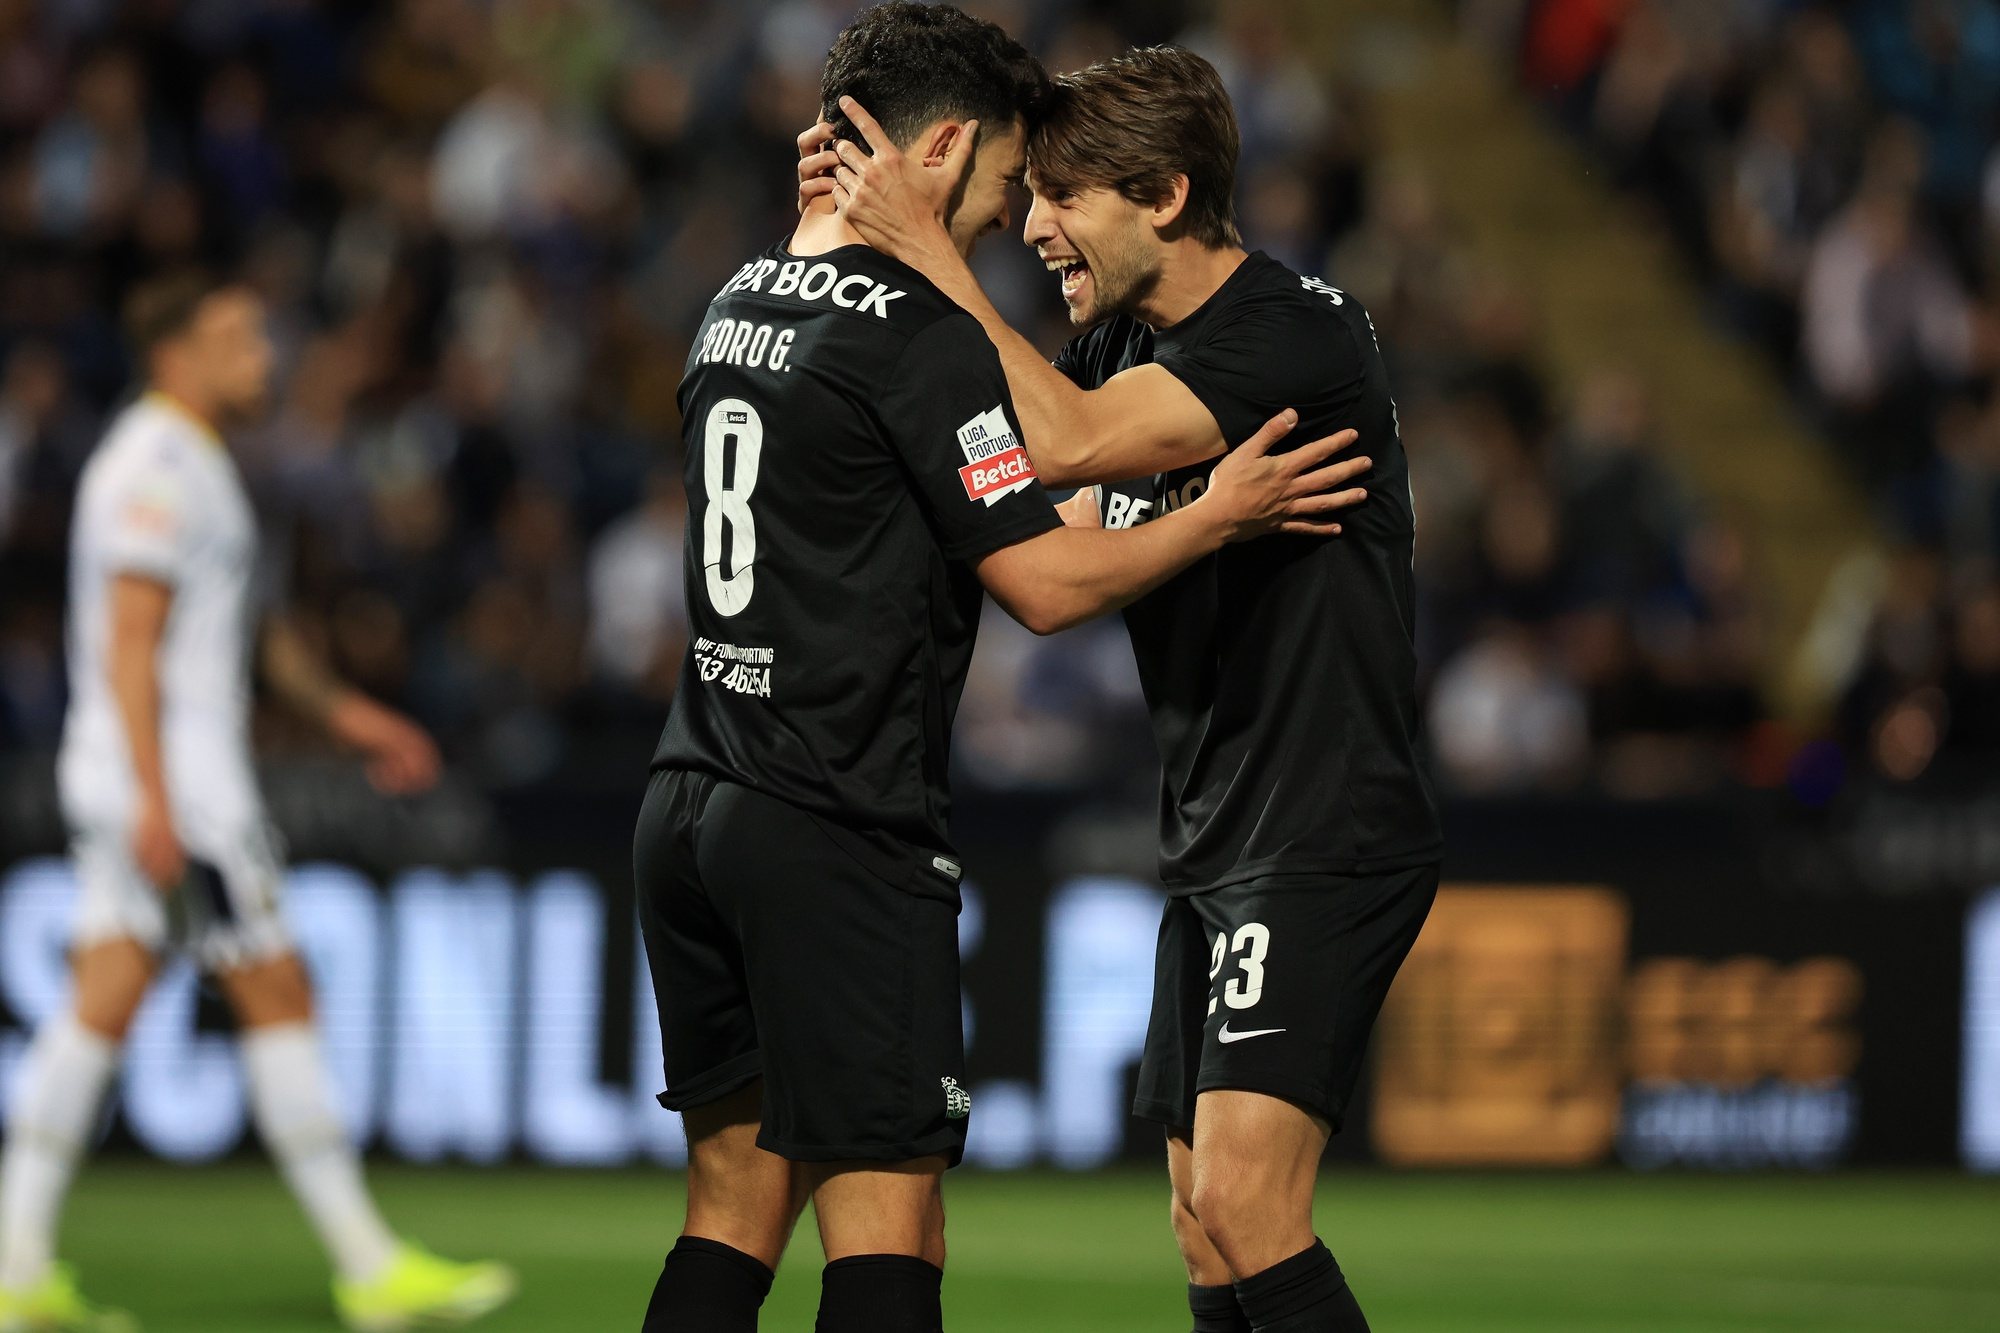 Sporting&#039;s players Pedro Goncalves (L) and Daniel Braganca celebrate a goal during the Portuguese First League soccer match between FC Famalicao and Sporting in Vila Nova de Famalicao, Portugal, 16 april 2024. ESTELA SILVA/LUSA